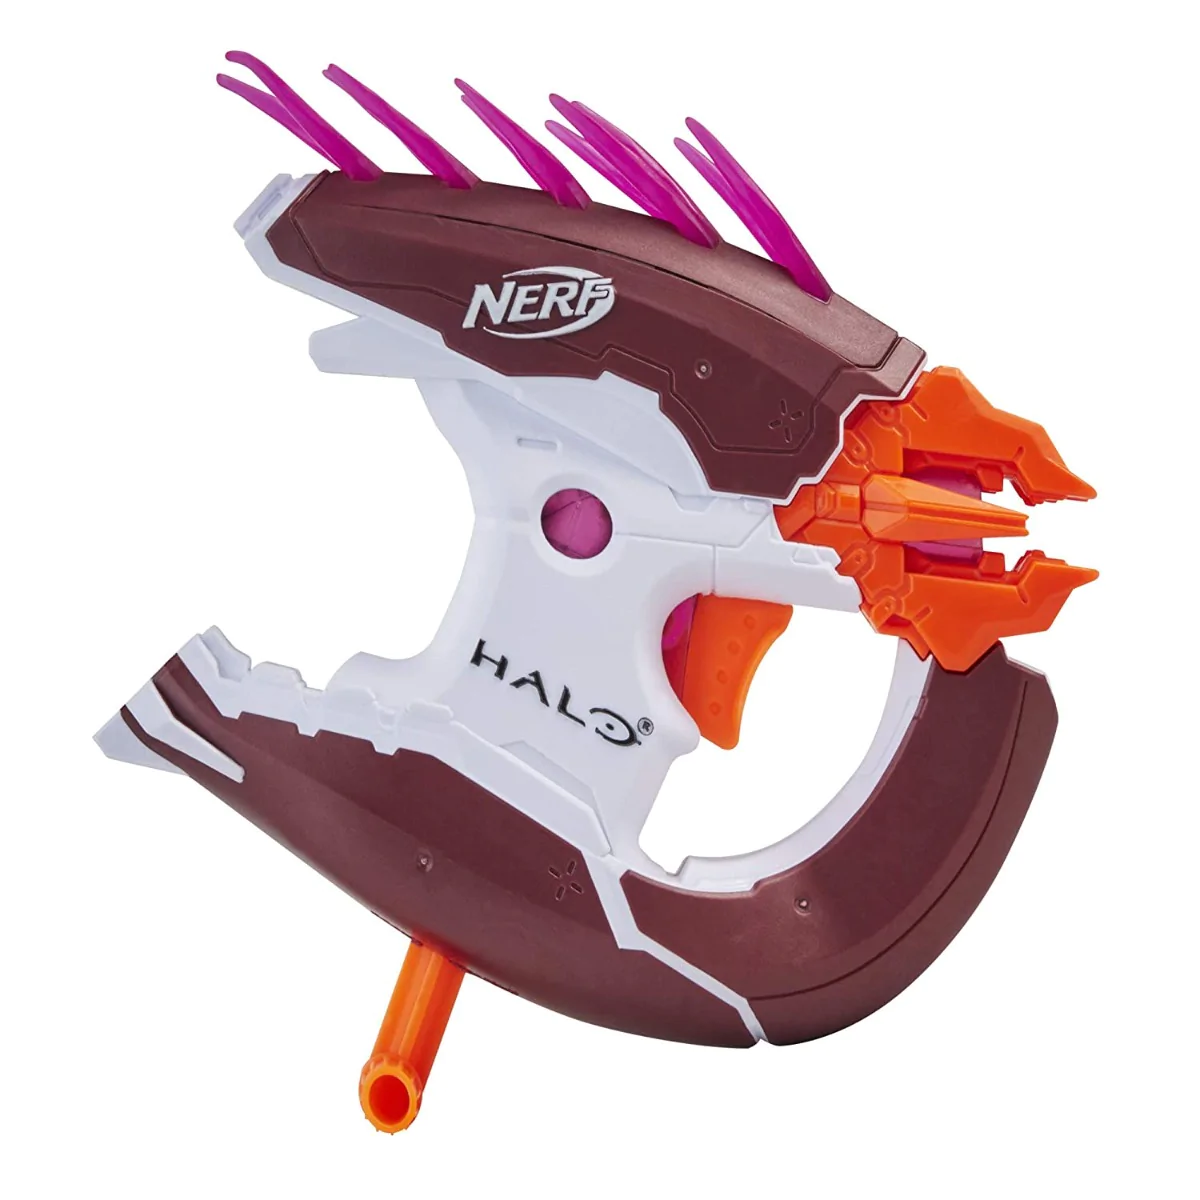 nerf_microshots_halo_needler_mini_dart-firing_blaster_and_2_nerf_darts_collectible_blaster_for_halo_video_game_fans_and_nerf_battlers_2